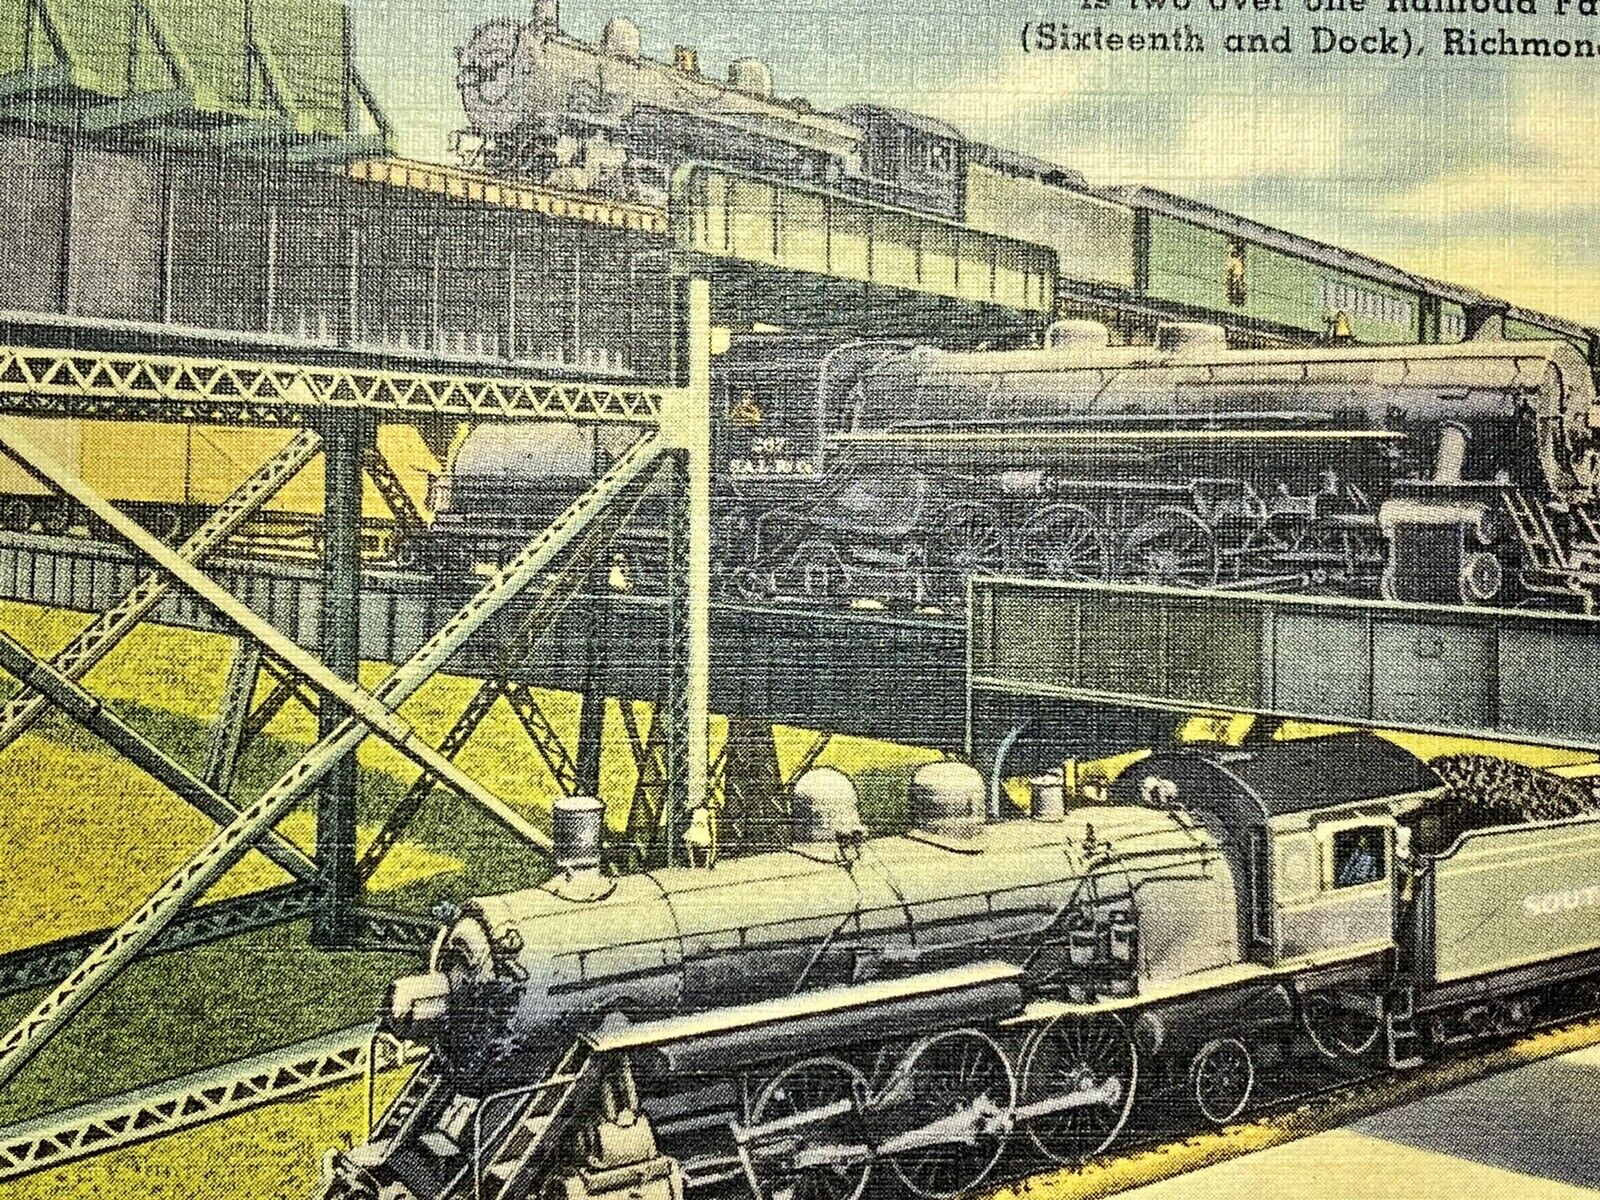 Richmond VA Virginia Is Two Over One Railroad Fare? Sixteenth And Dock Postcard